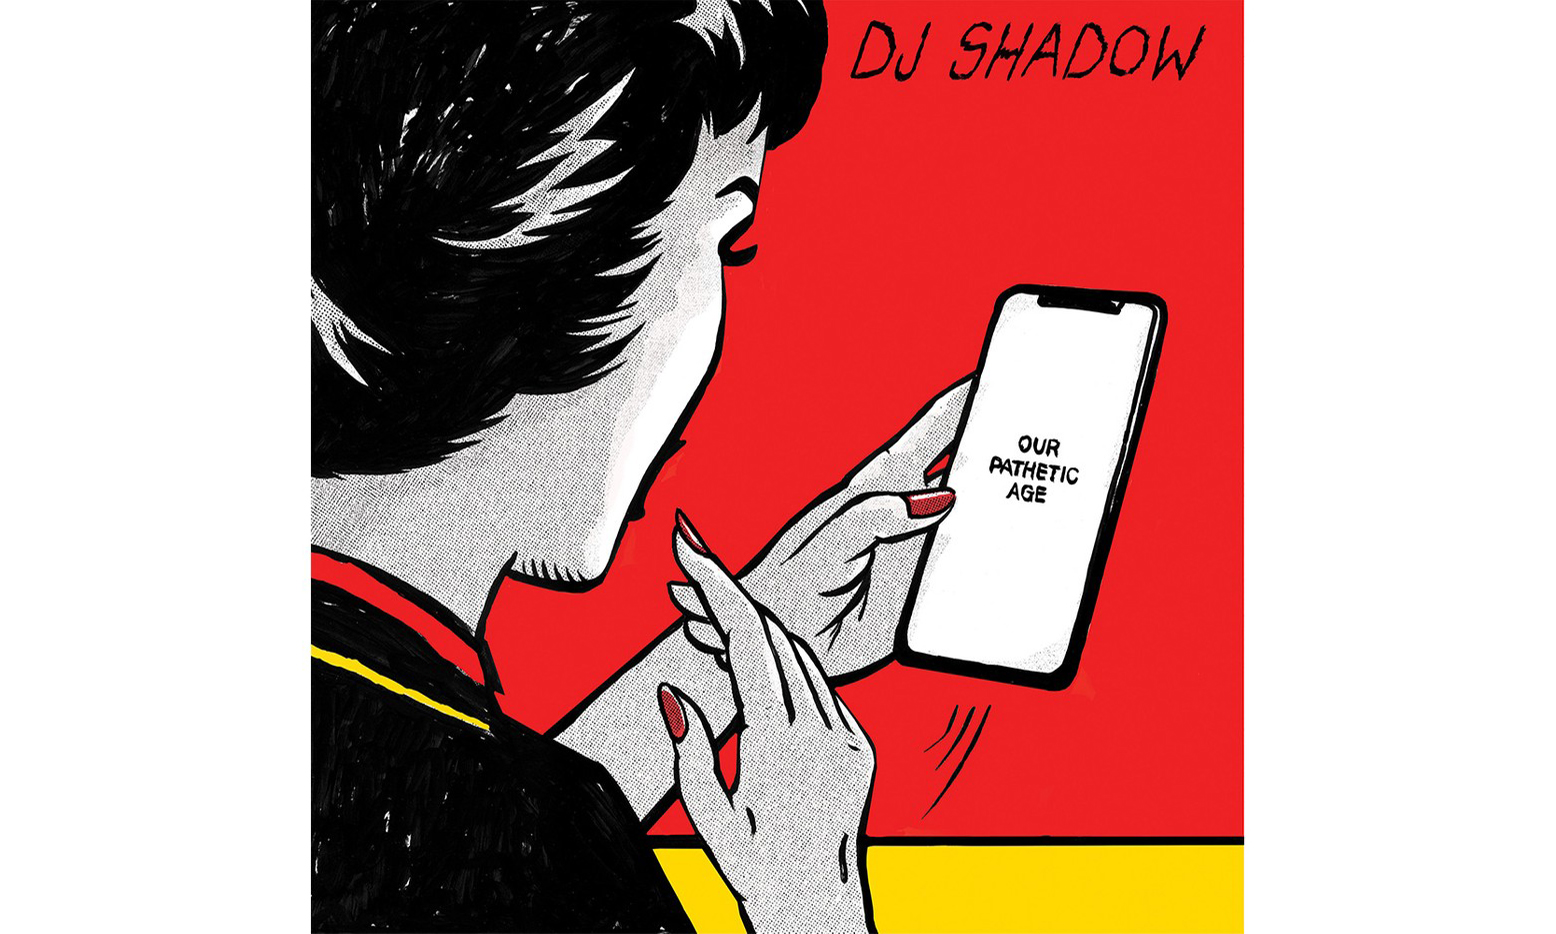 DJ Shadow 全新大碟《Our Pathetic Age》发布